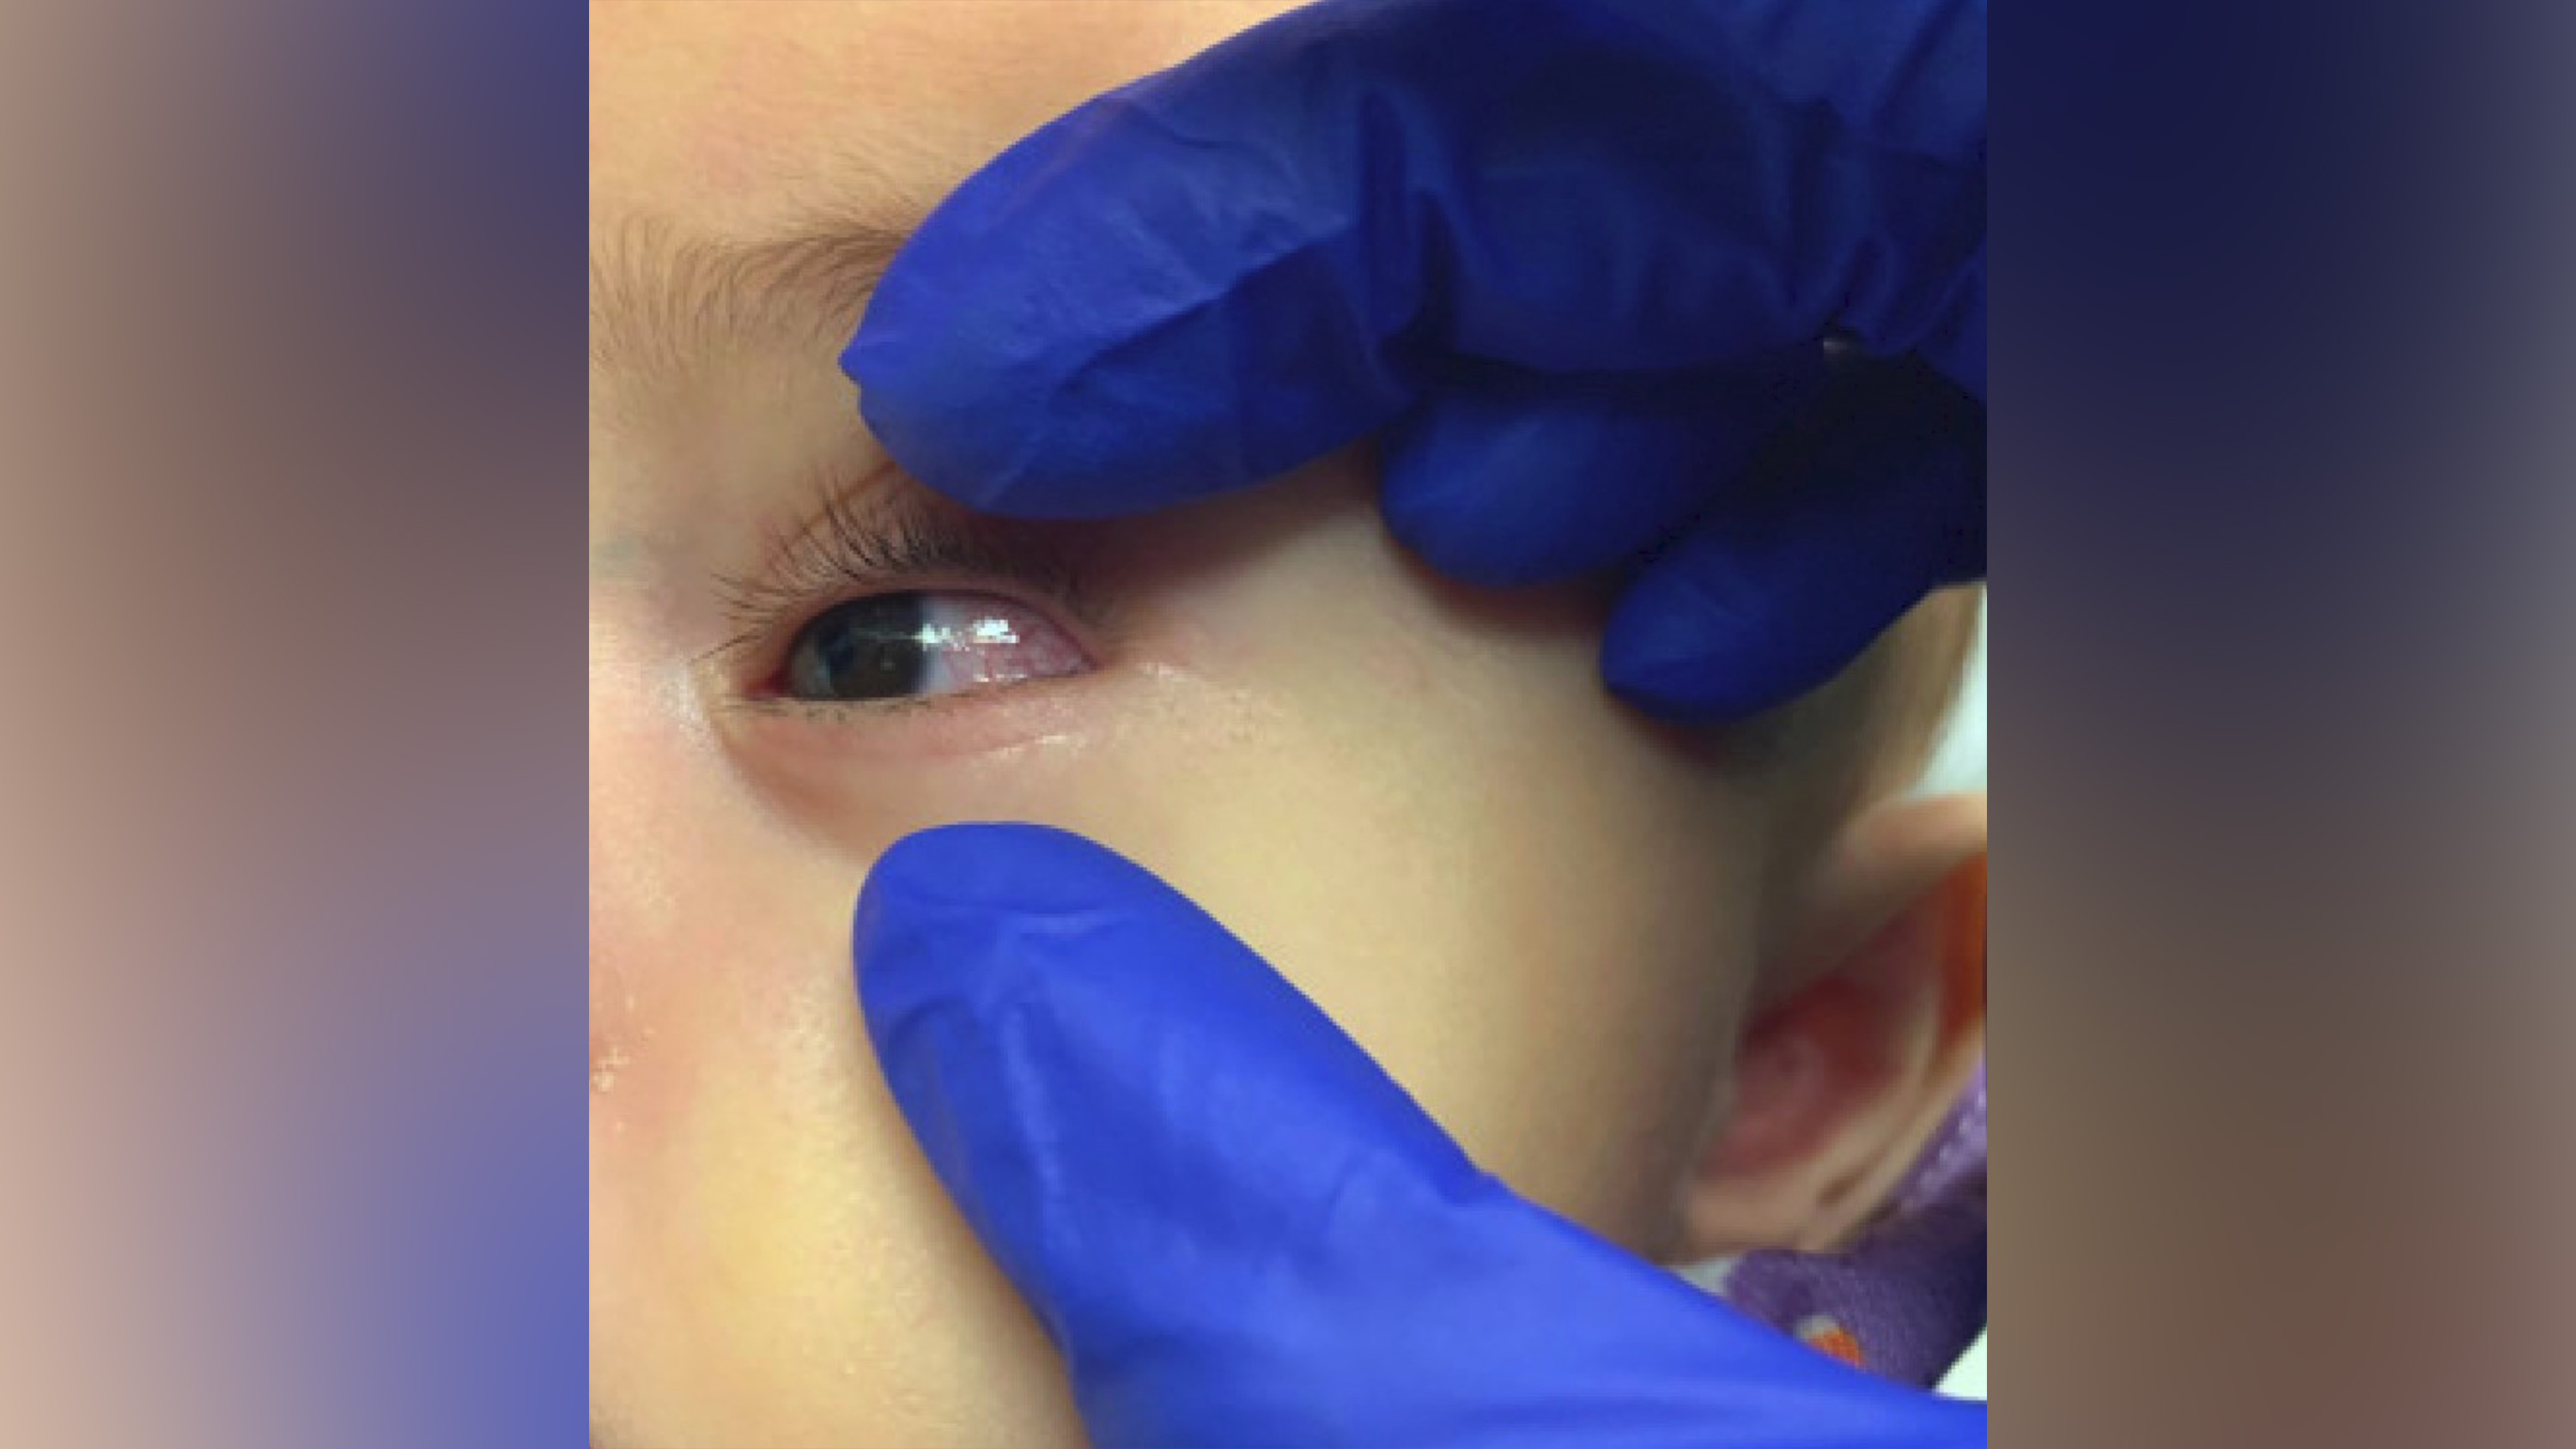 Bulbar conjunctival injection is shown in the case study of a 6-month-old infant admitted and diagnosed with classic Kawasaki disease, who also screened positive for Covid-19 in the setting of fever and minimal respiratory symptoms. 